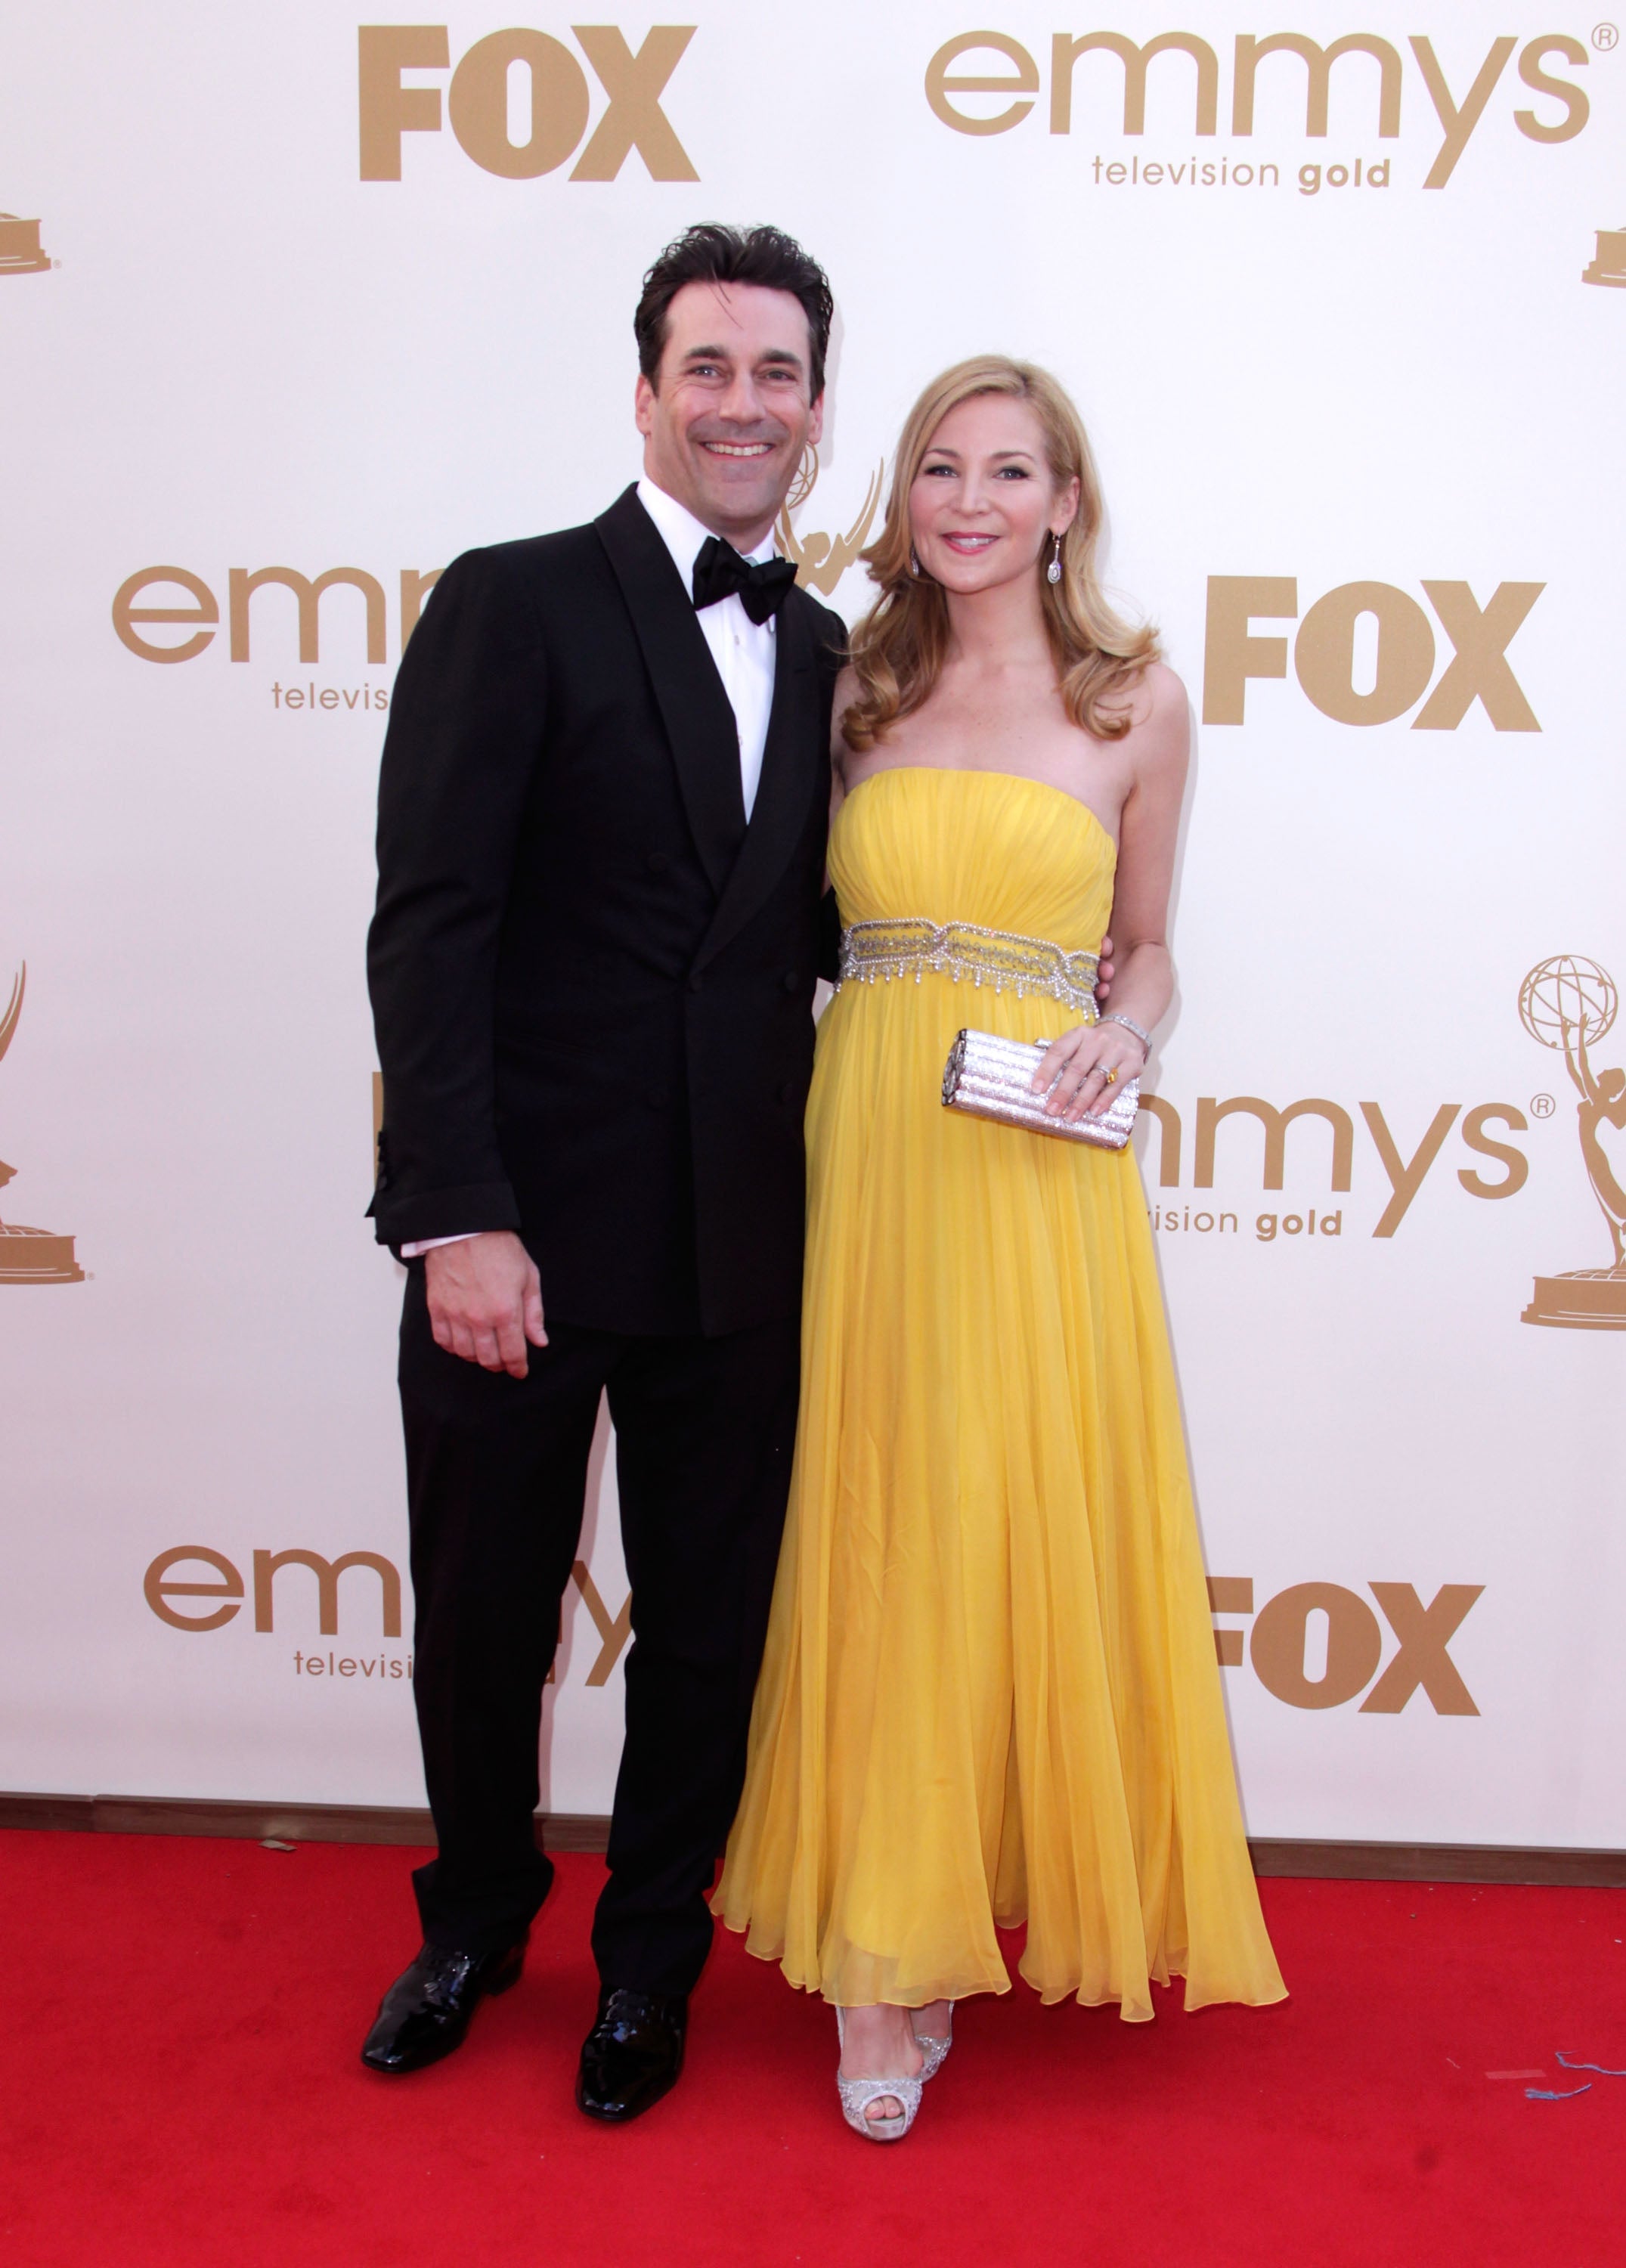 A-List Couples Glam Up at Last Year's Emmys | Entertainment Tonight